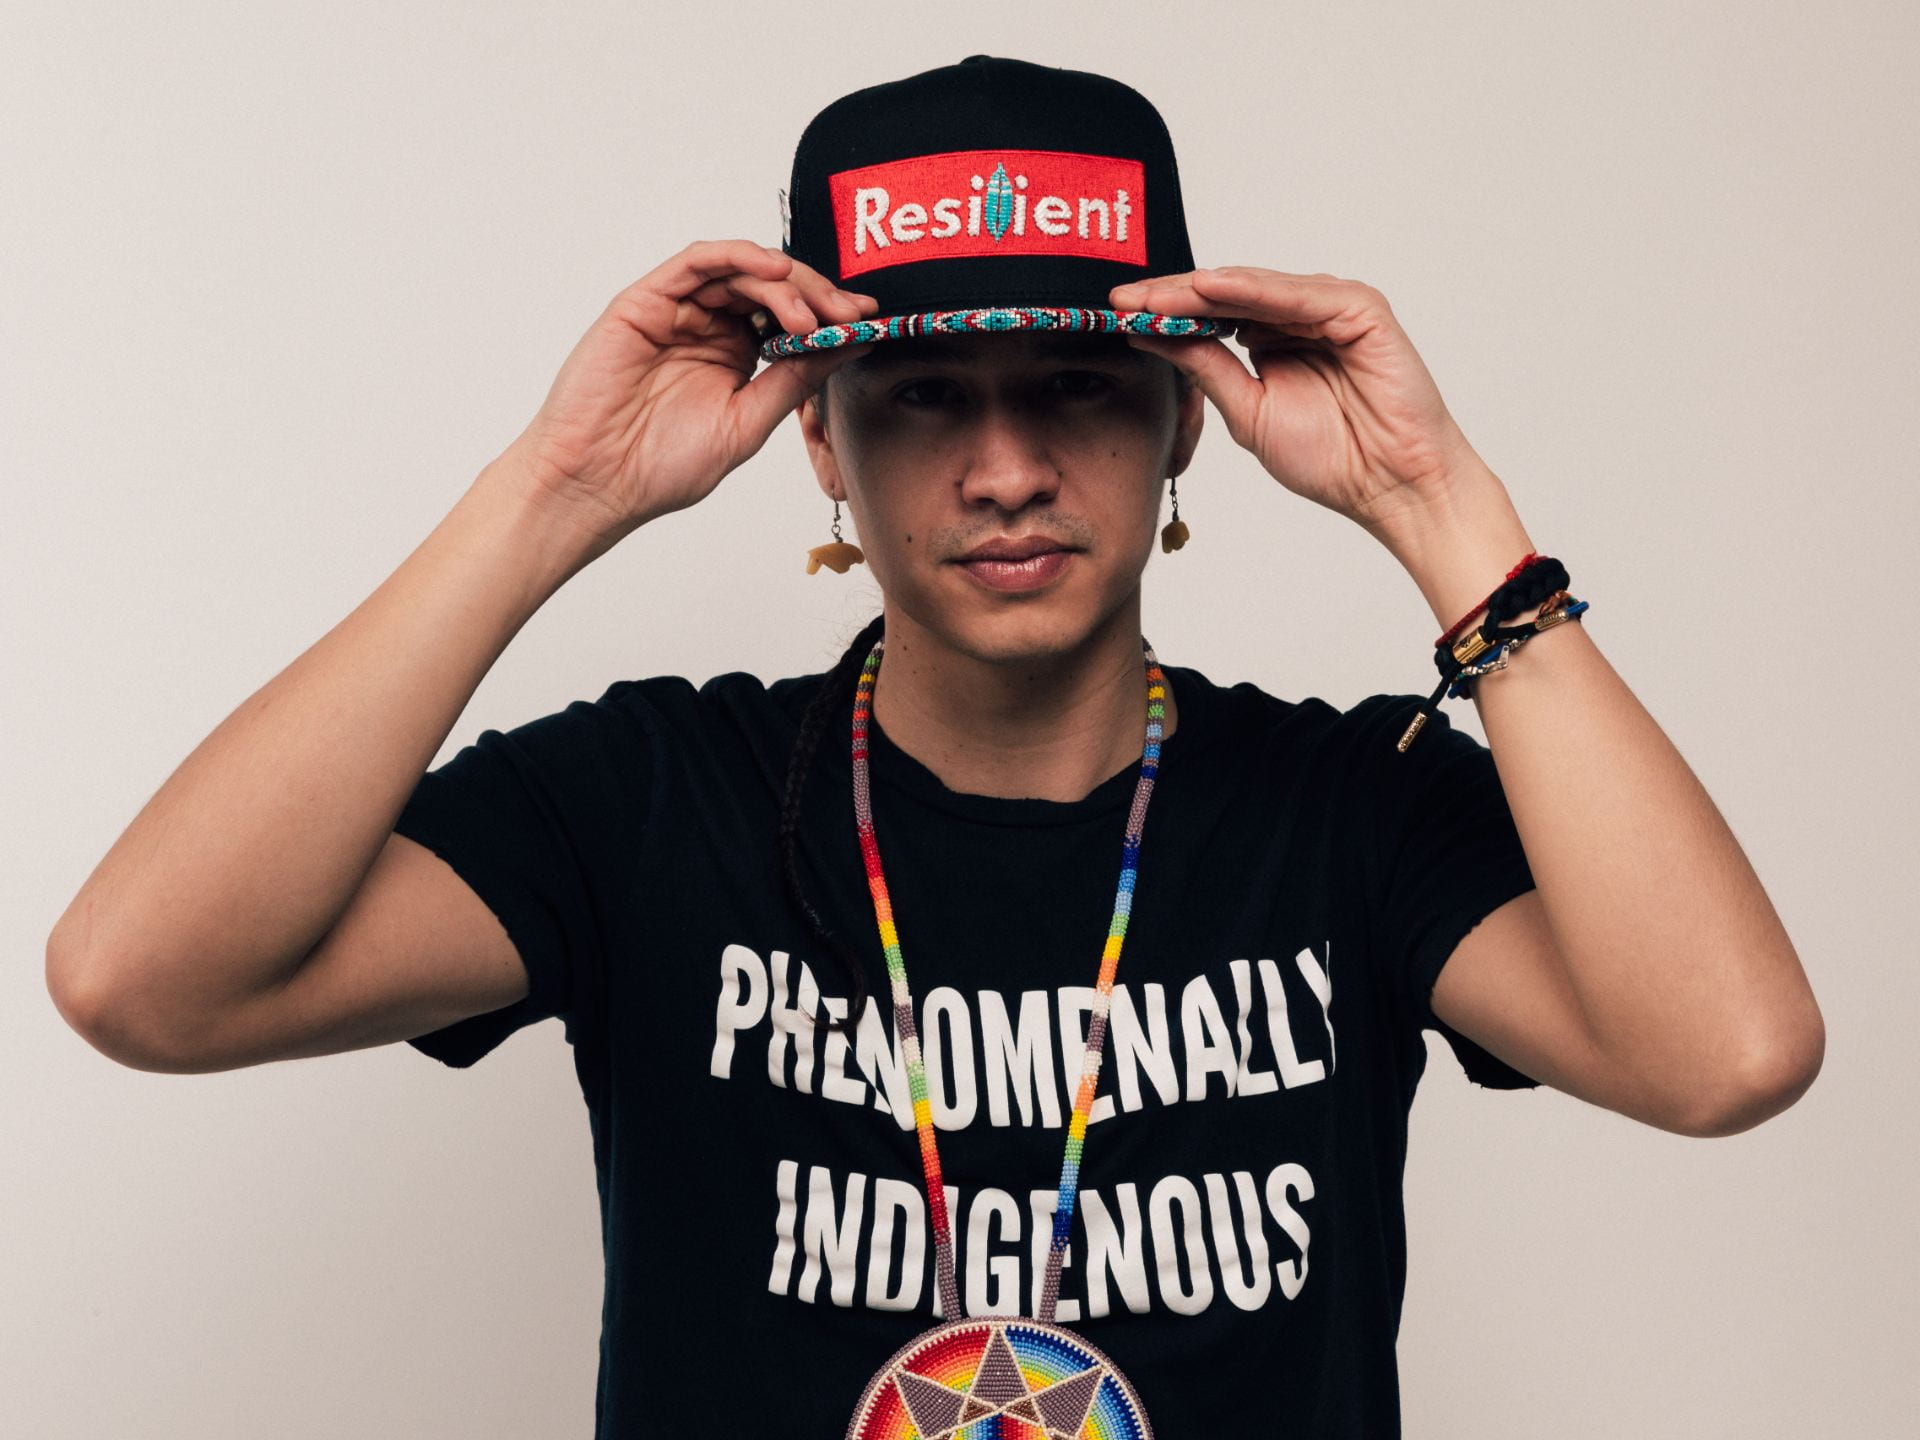 a photo of Frank Waln wearing a cap that says "Resist" in the "Supreme" style, and a t-shirt that says "Phenomenally Indigenous"